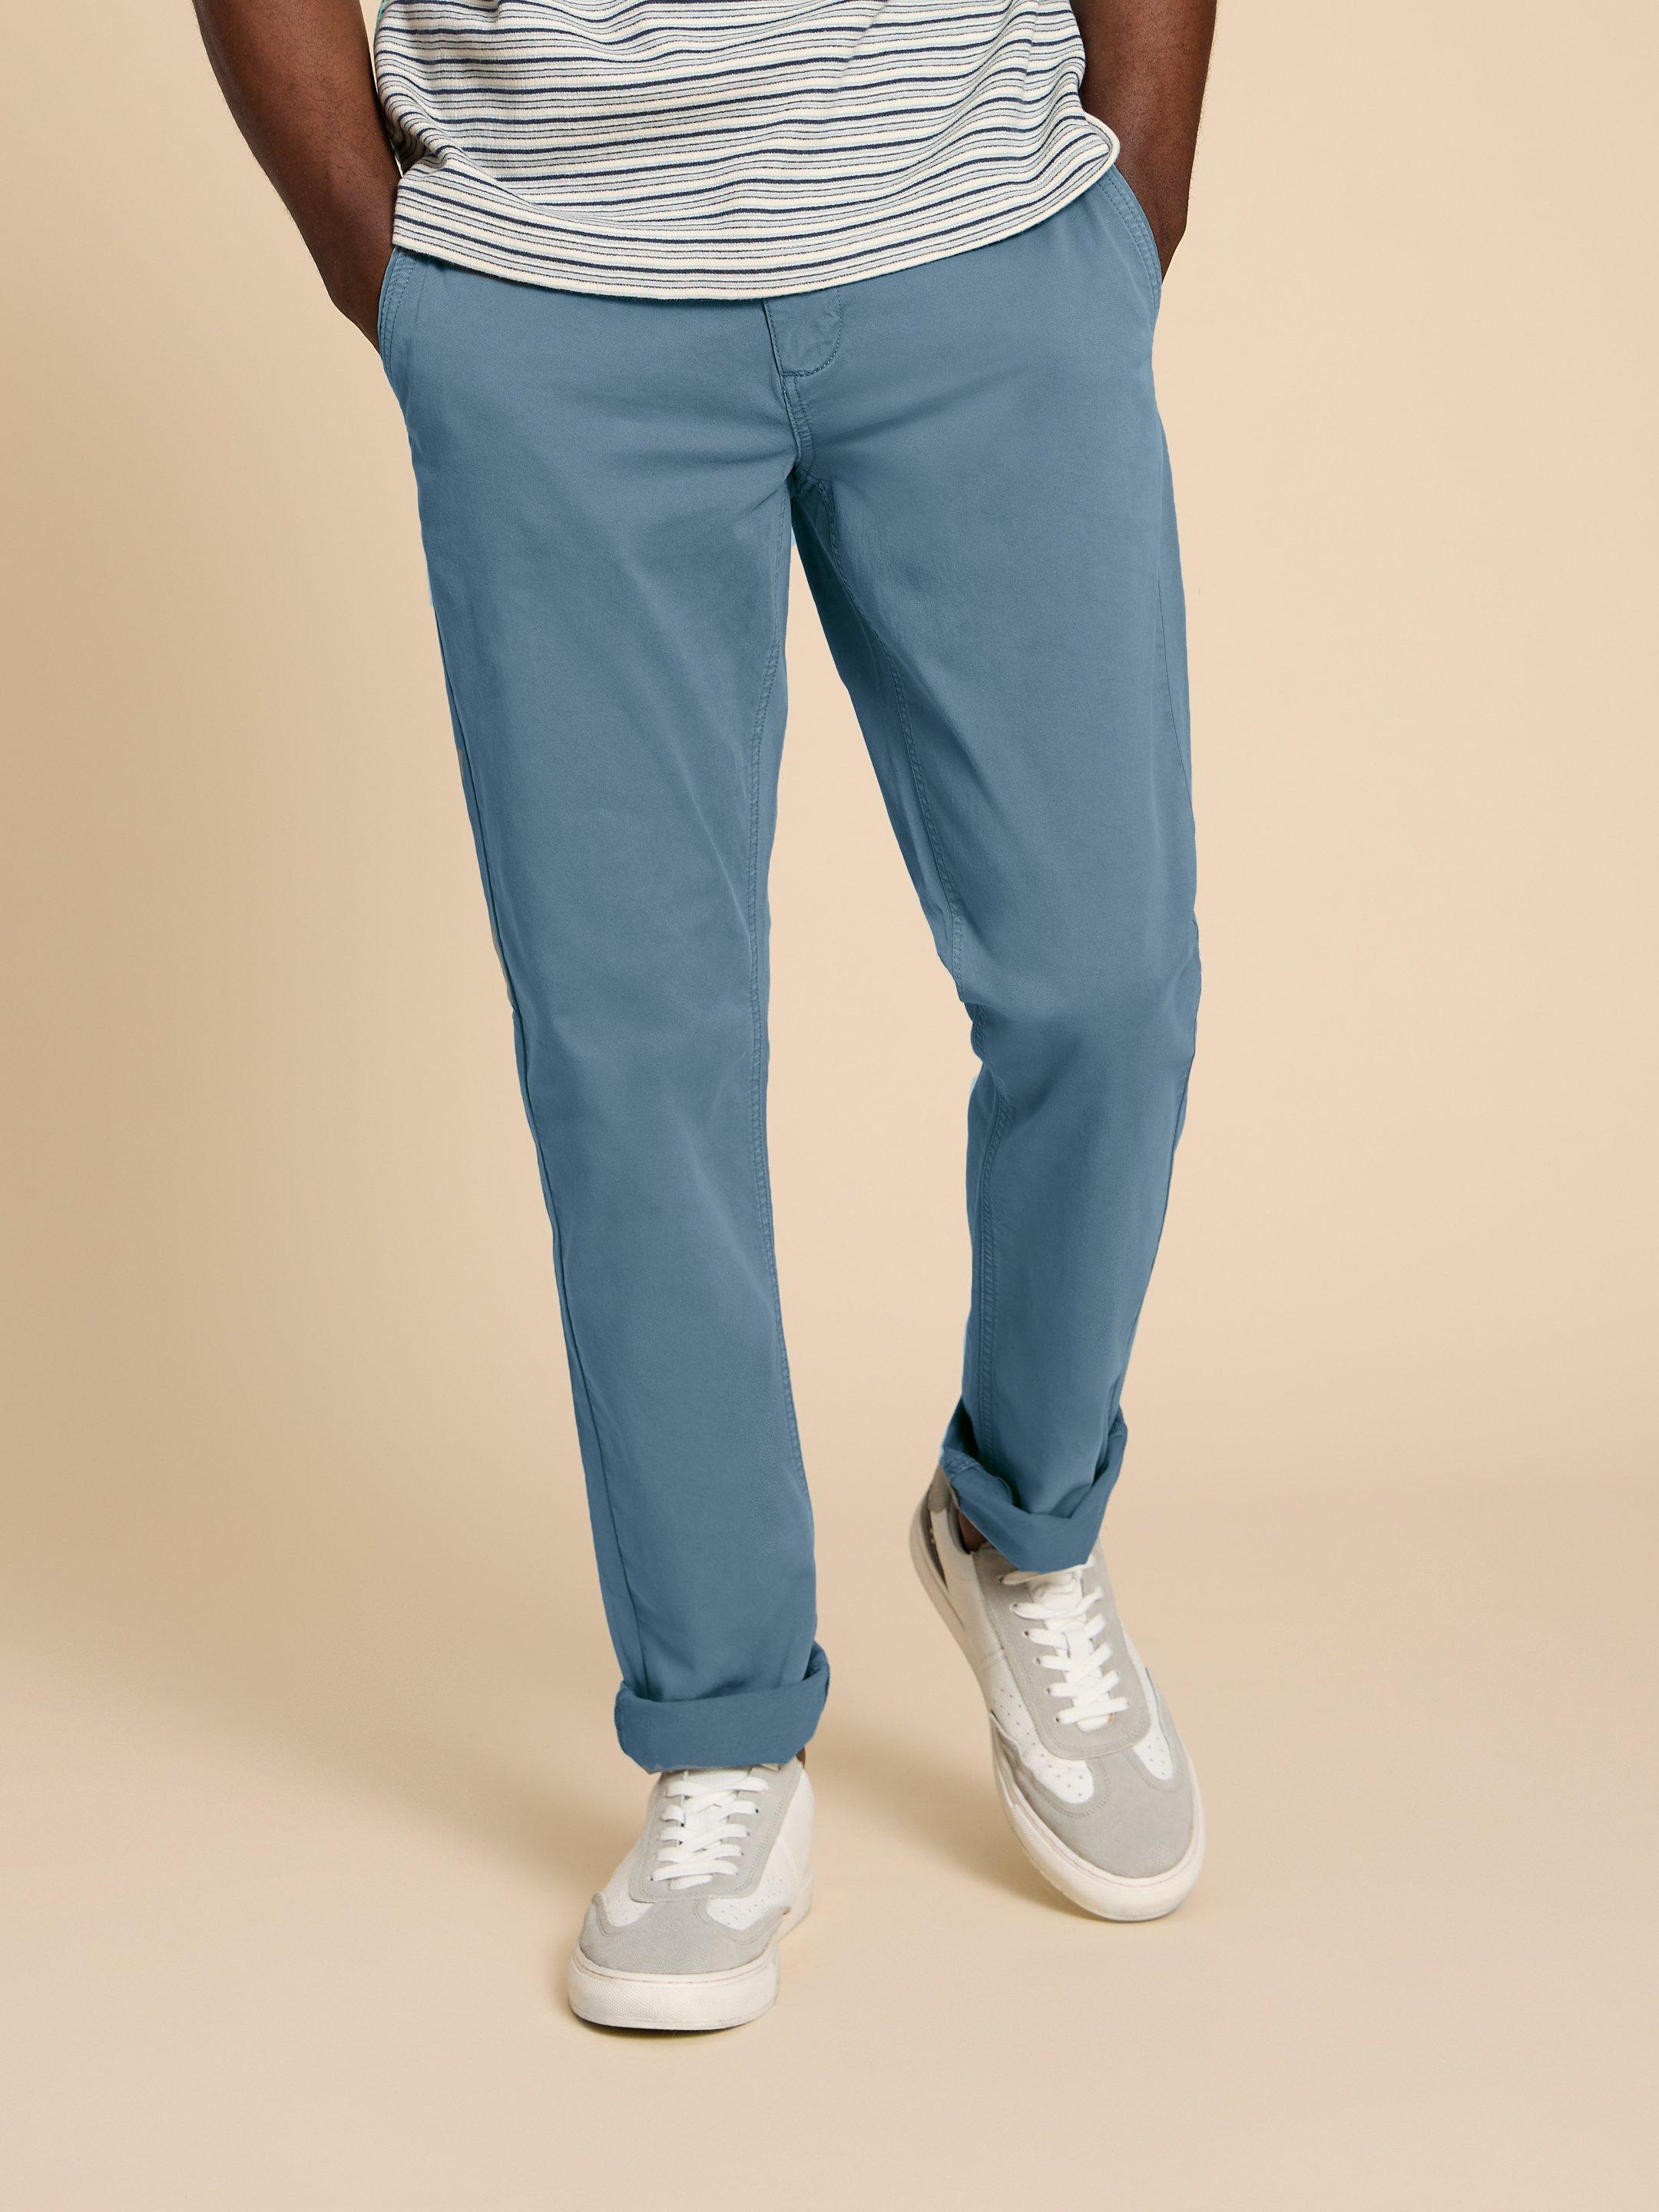 Sutton Organic Chino Trouser in MID BLUE - MODEL DETAIL